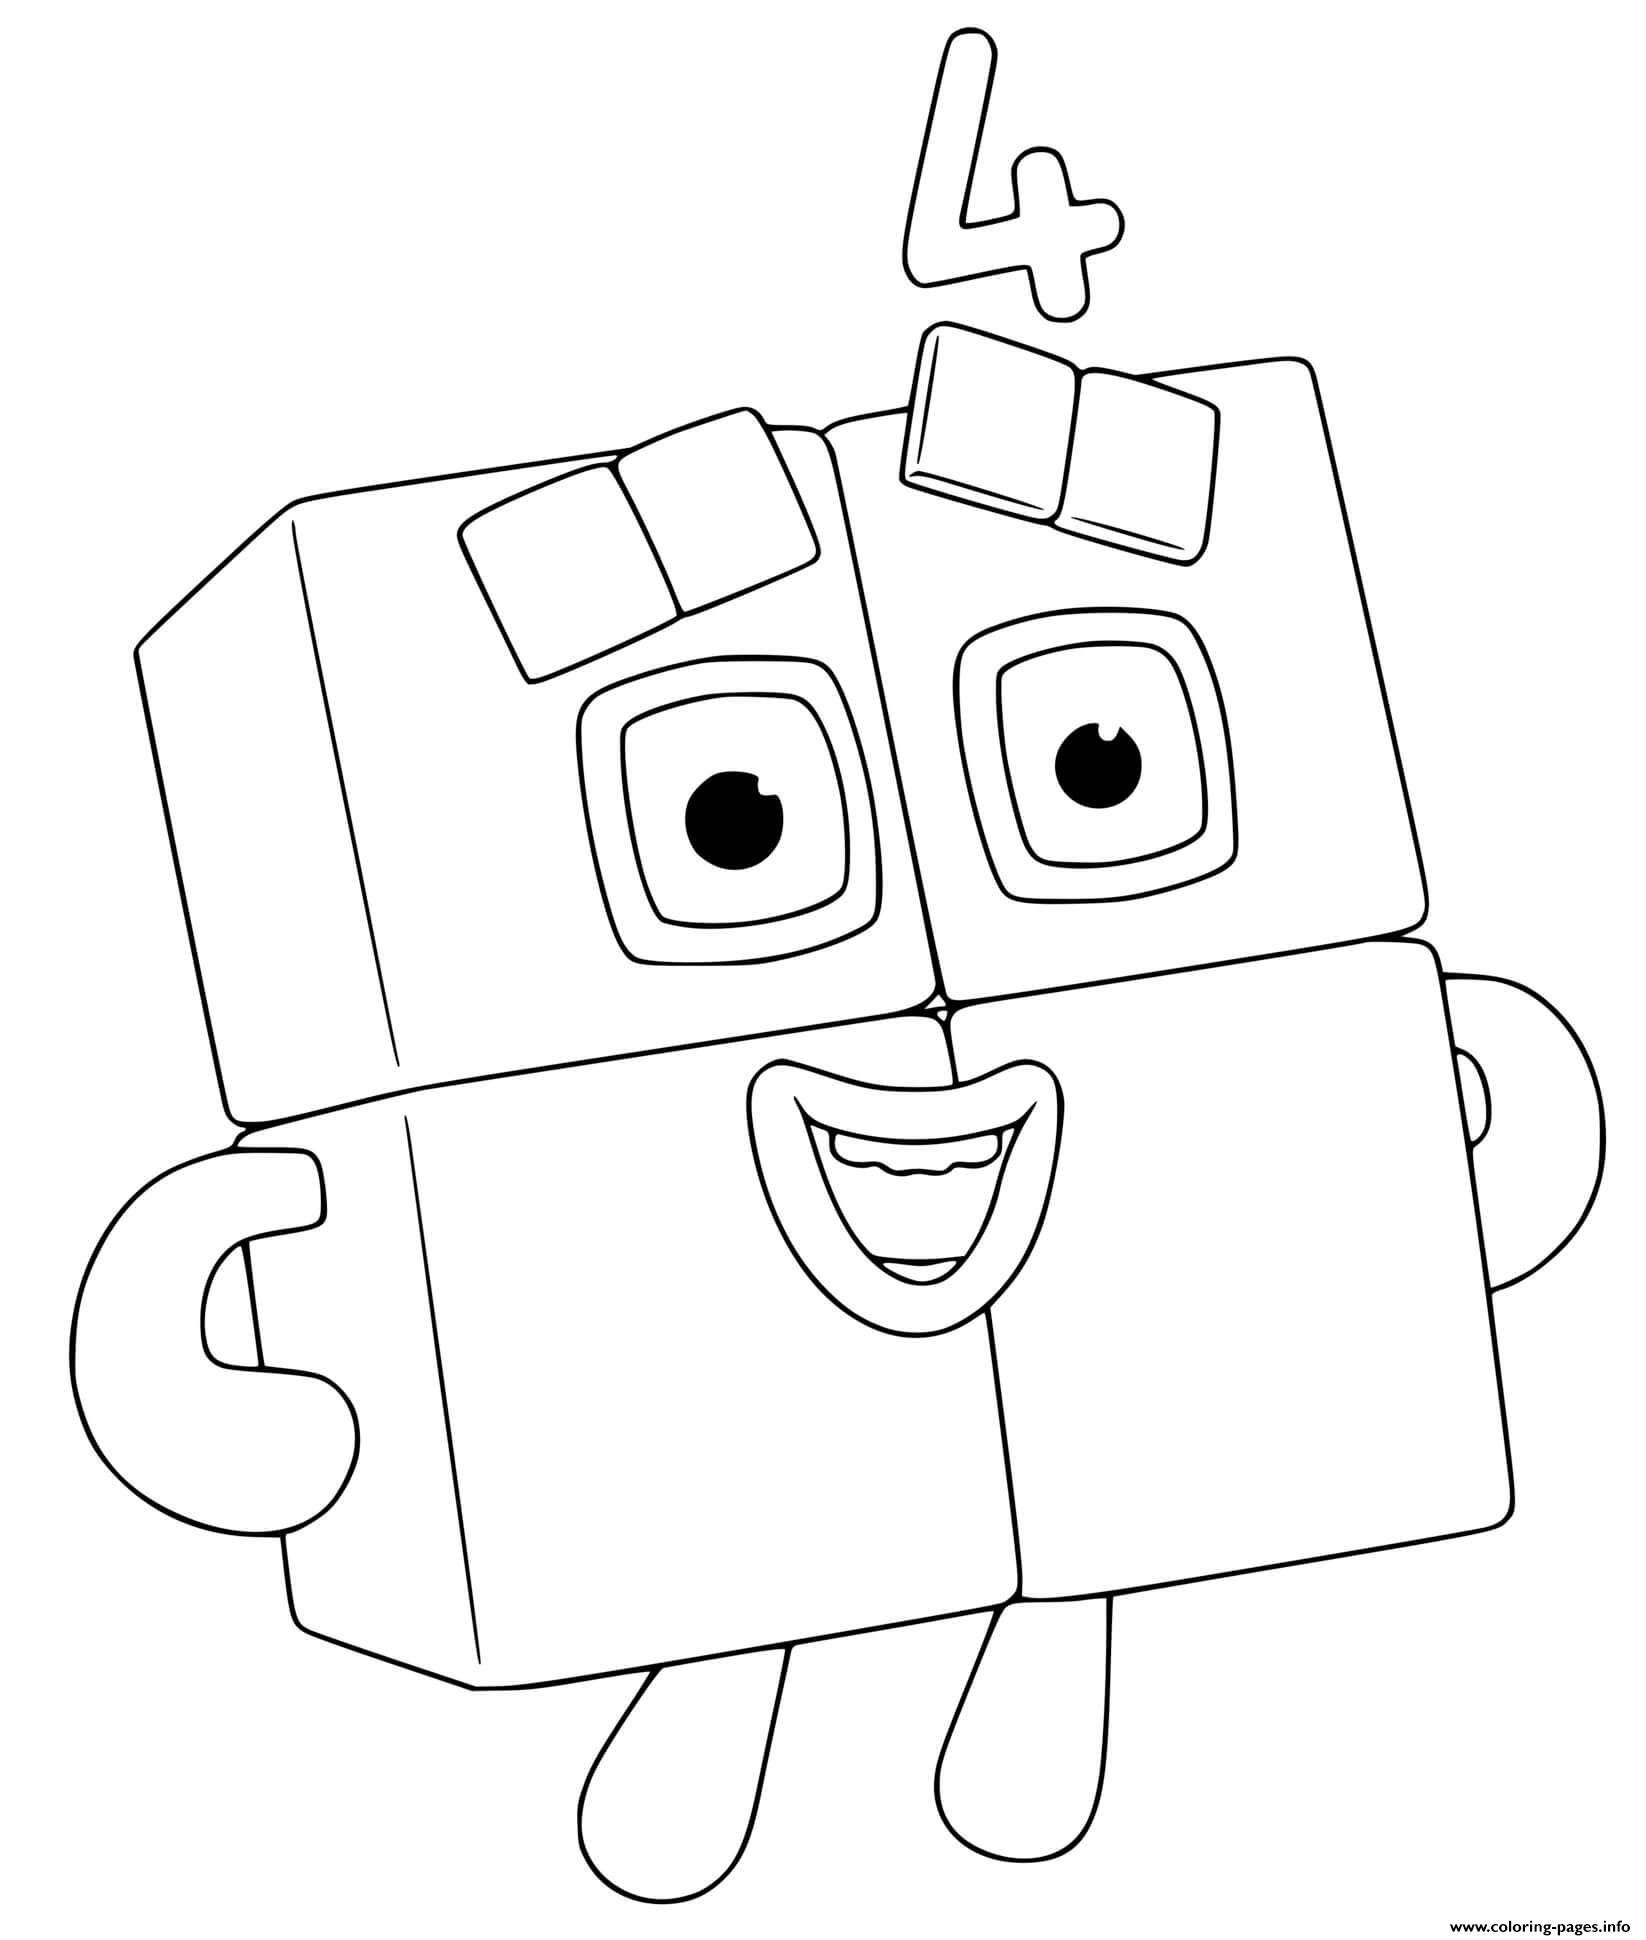 numberblocks-2-coloring-book-for-kids-to-print-and-online